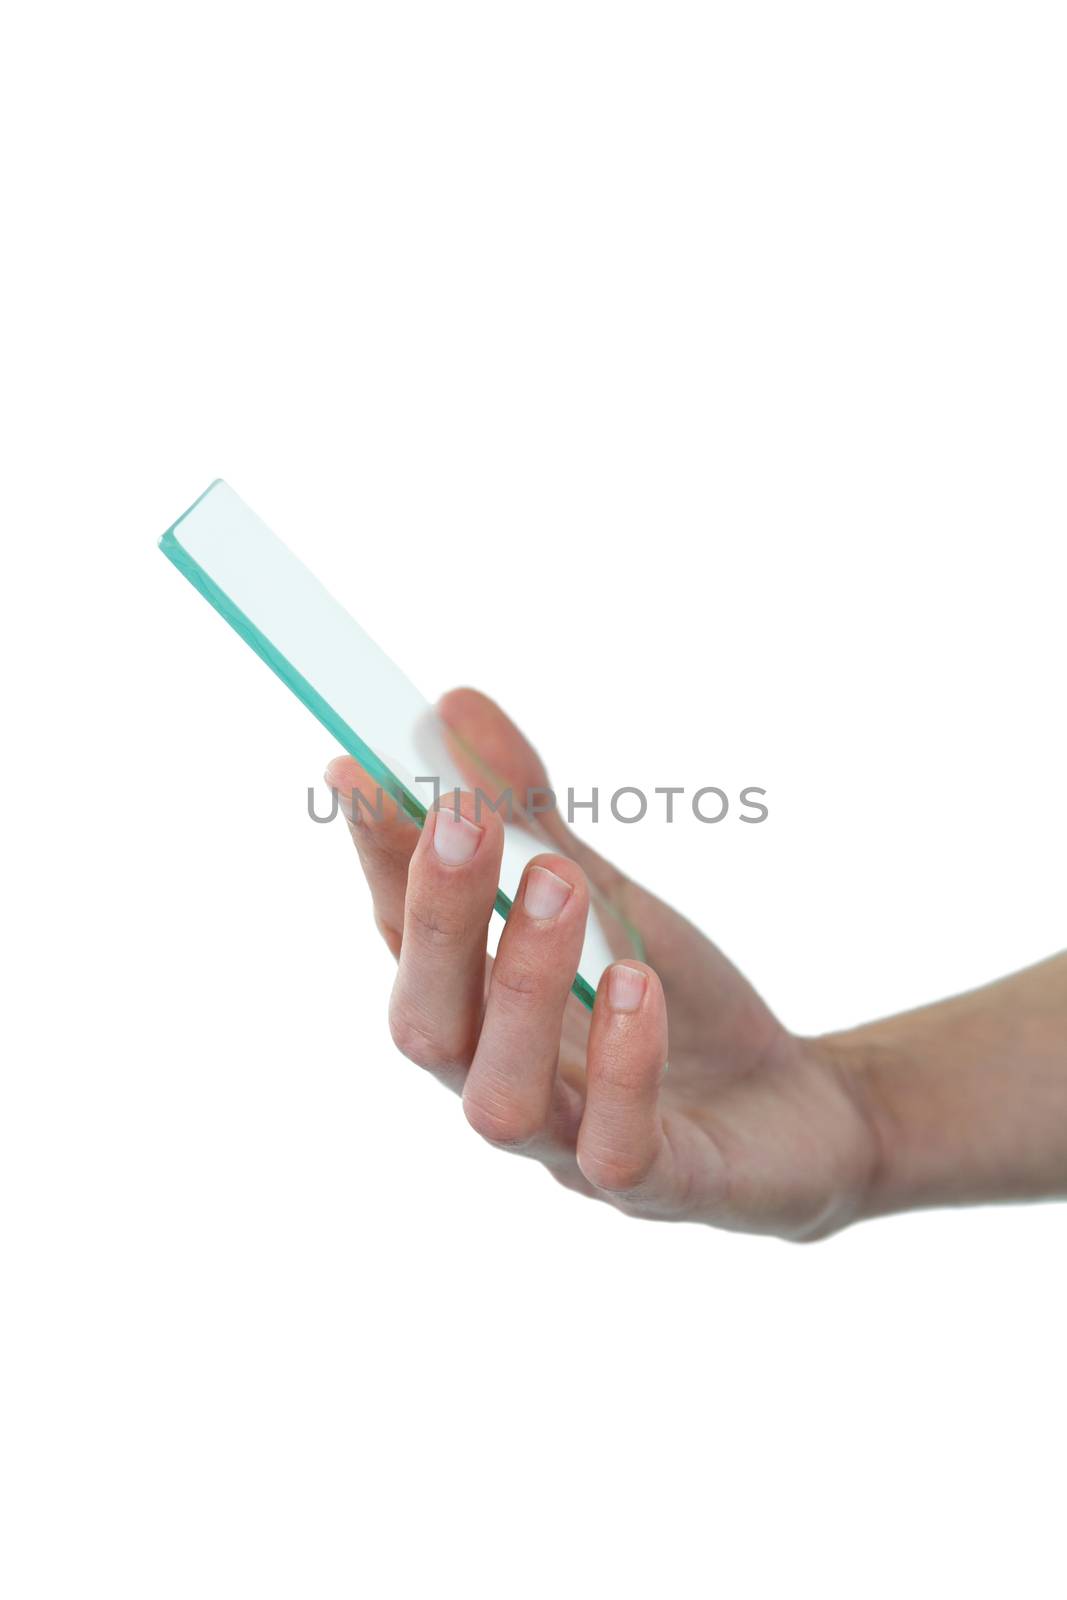 Hand holding futuristic mobile phone against white background